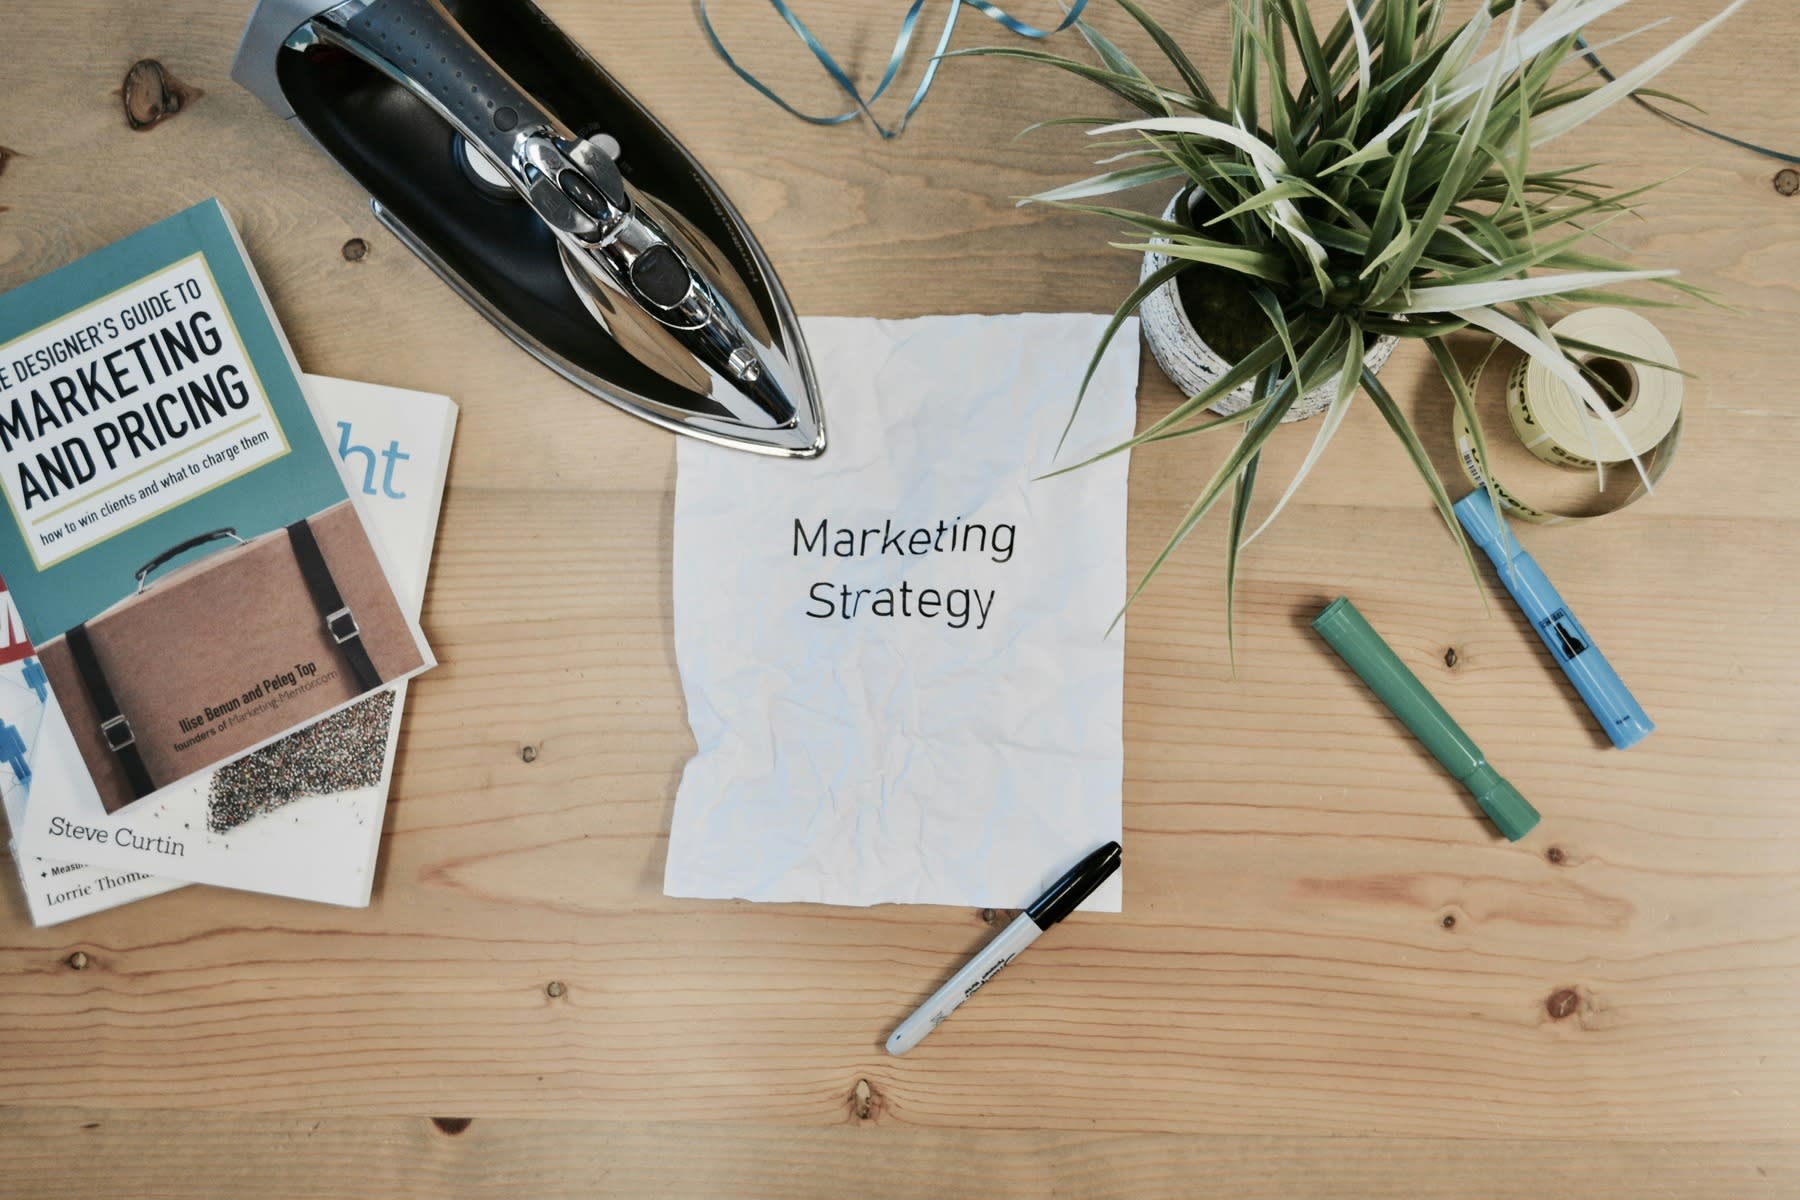 White paper with printed text of the word Marketing Strategy written on it, with books, pens and a pot of plant on the table